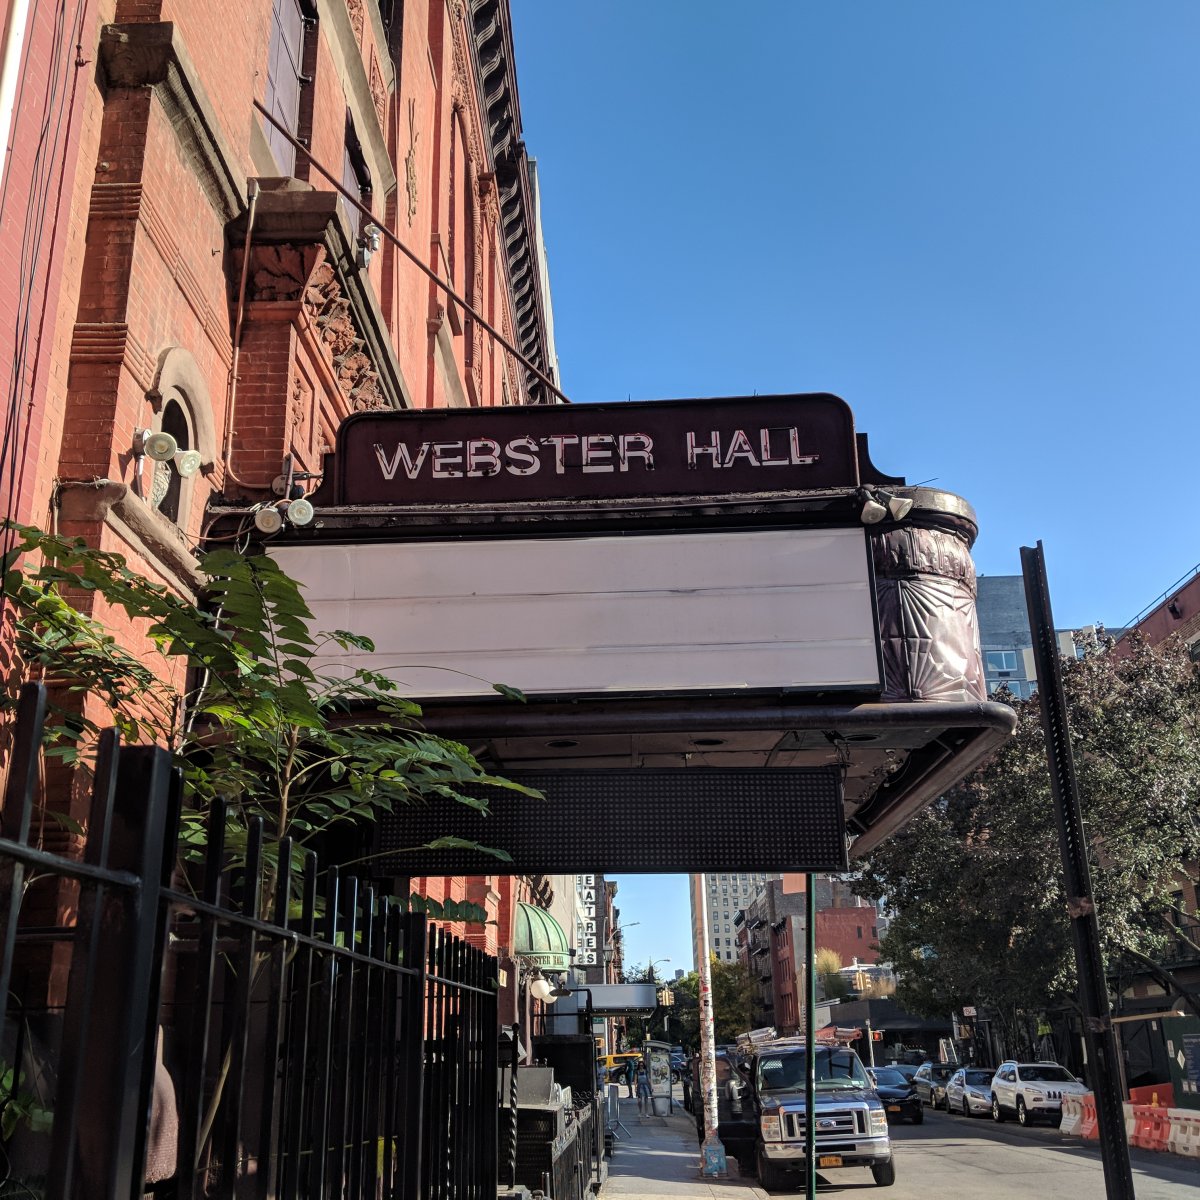 Image of exterior marquee for Webster Hall